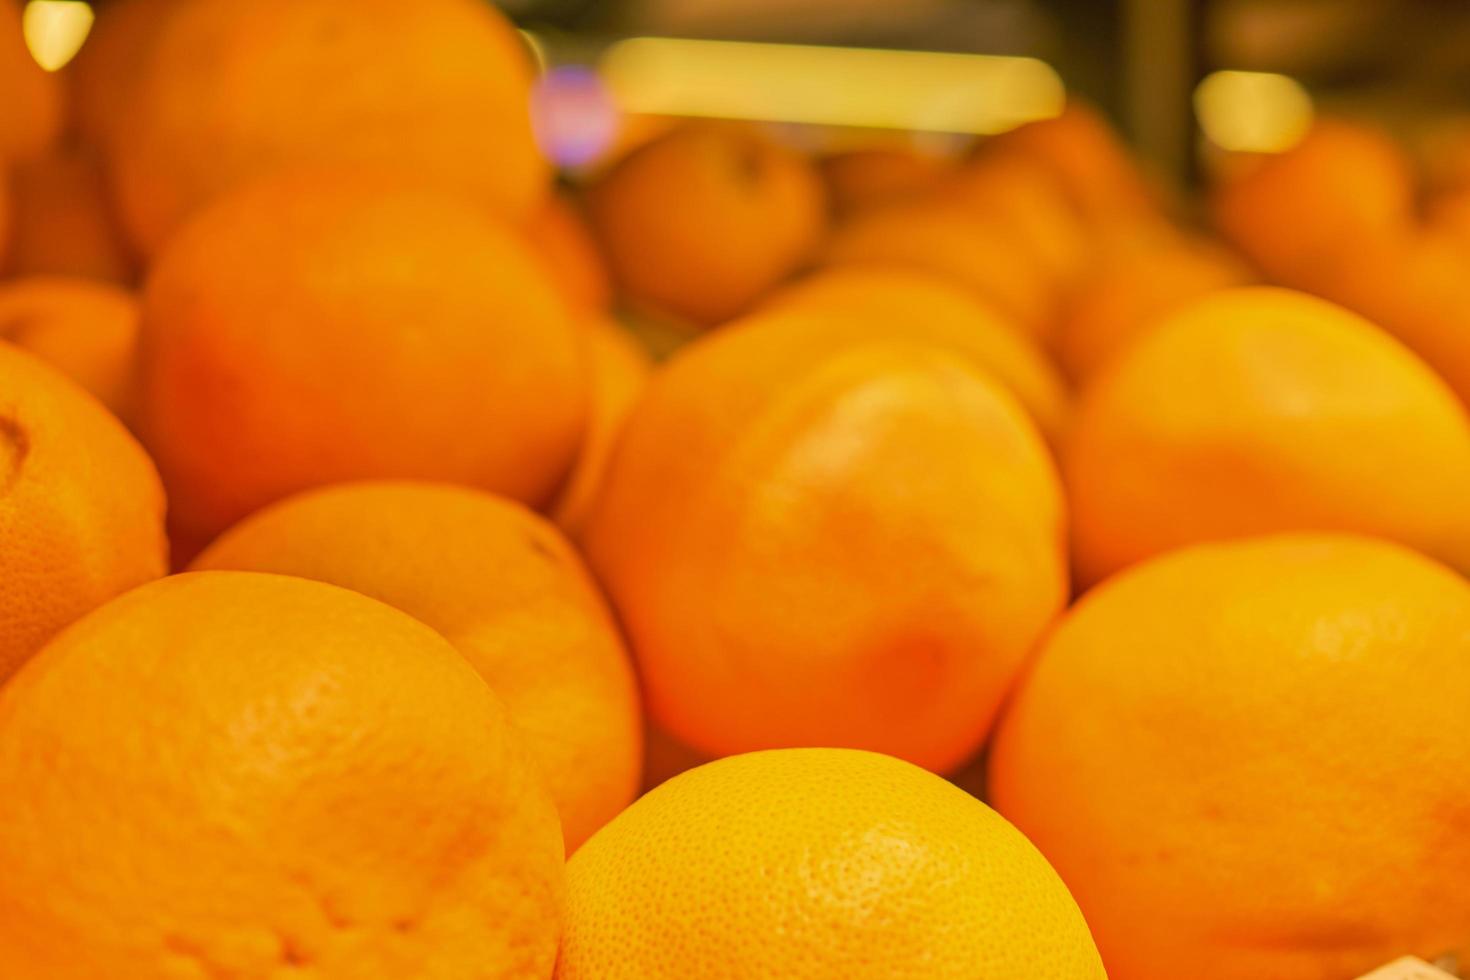 Blurred background of shelf with oranges, background and splash idea for advertising or shop photo